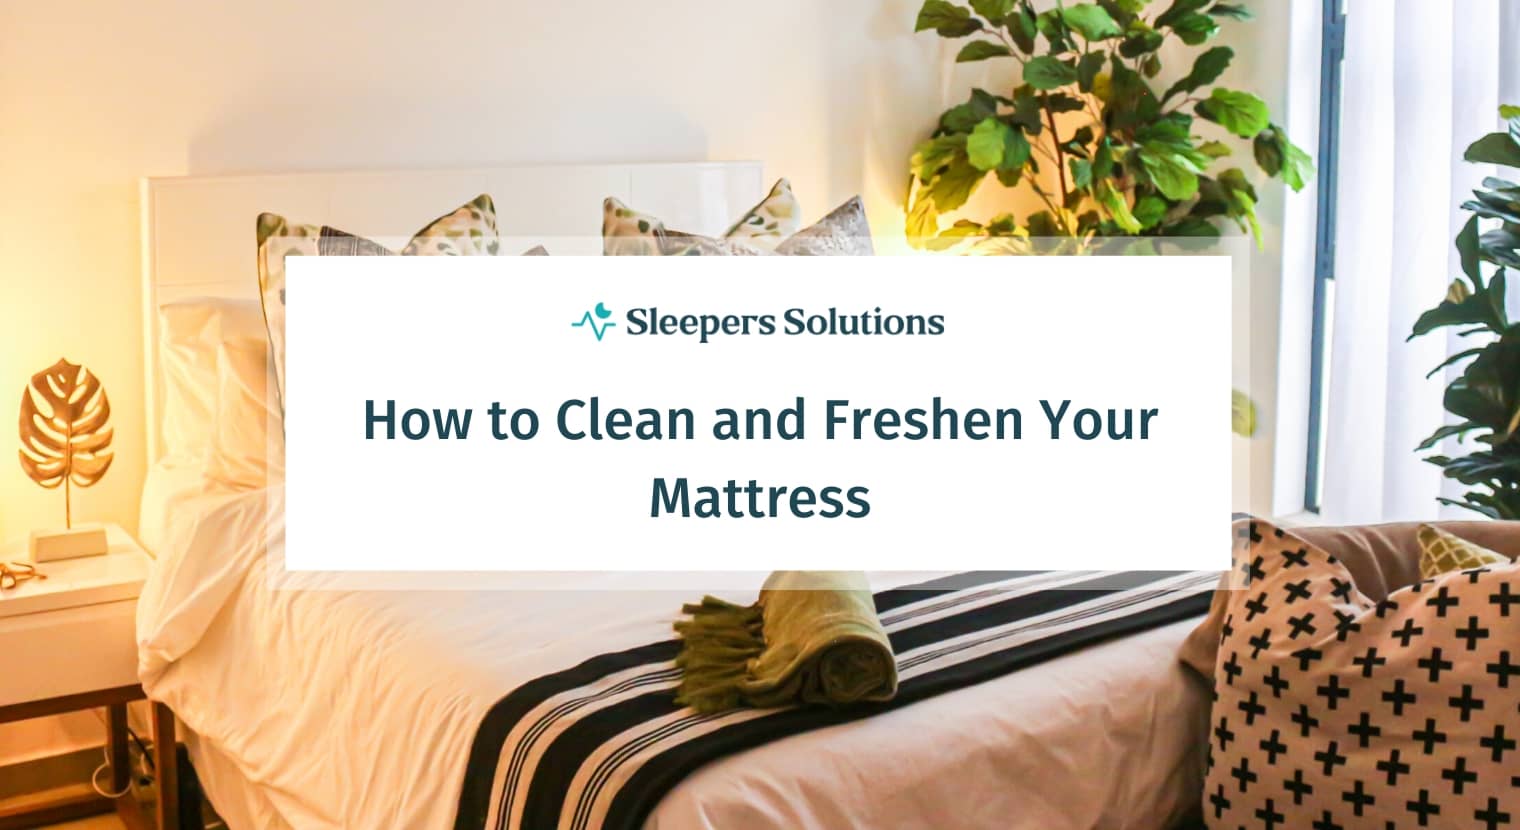 How to Freshen Your Mattress In 4 Easy Steps